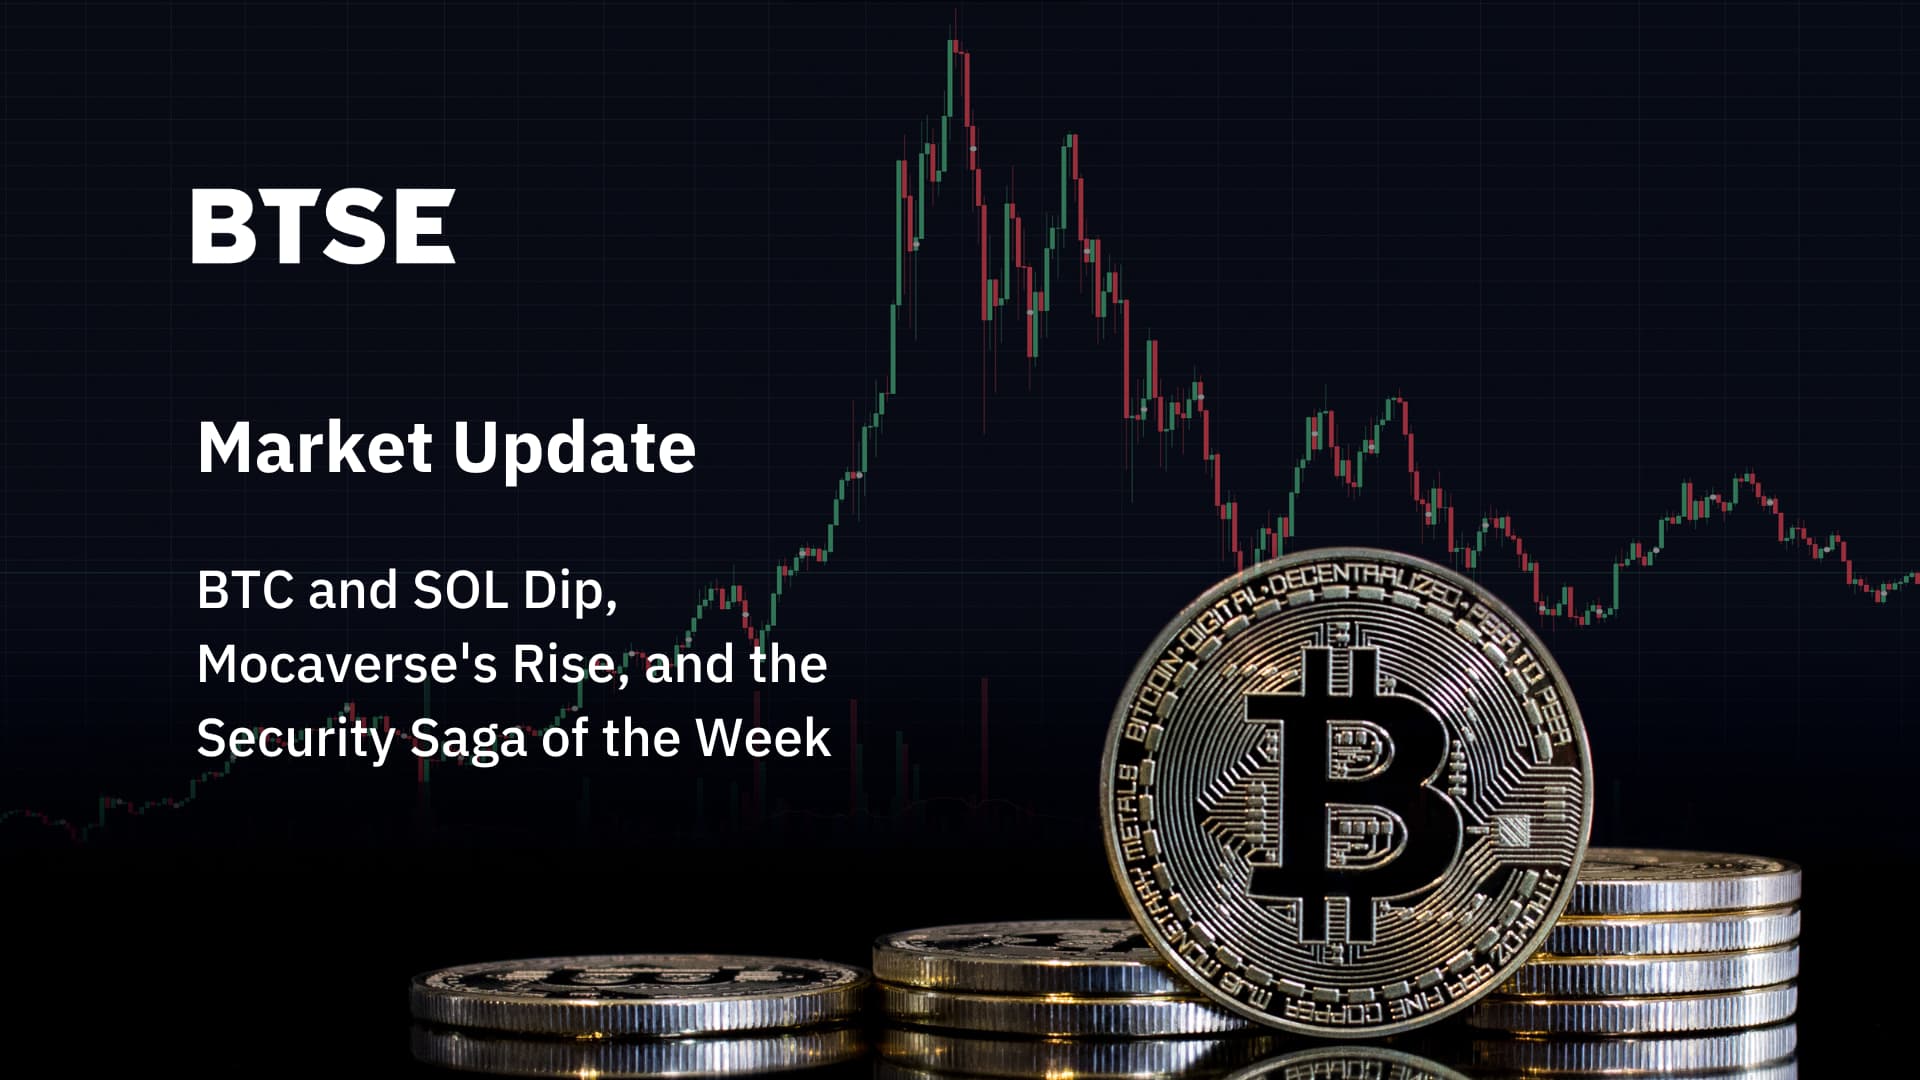 BTC and SOL Dip, Mocaverse's Rise, and the Security Saga of the Week